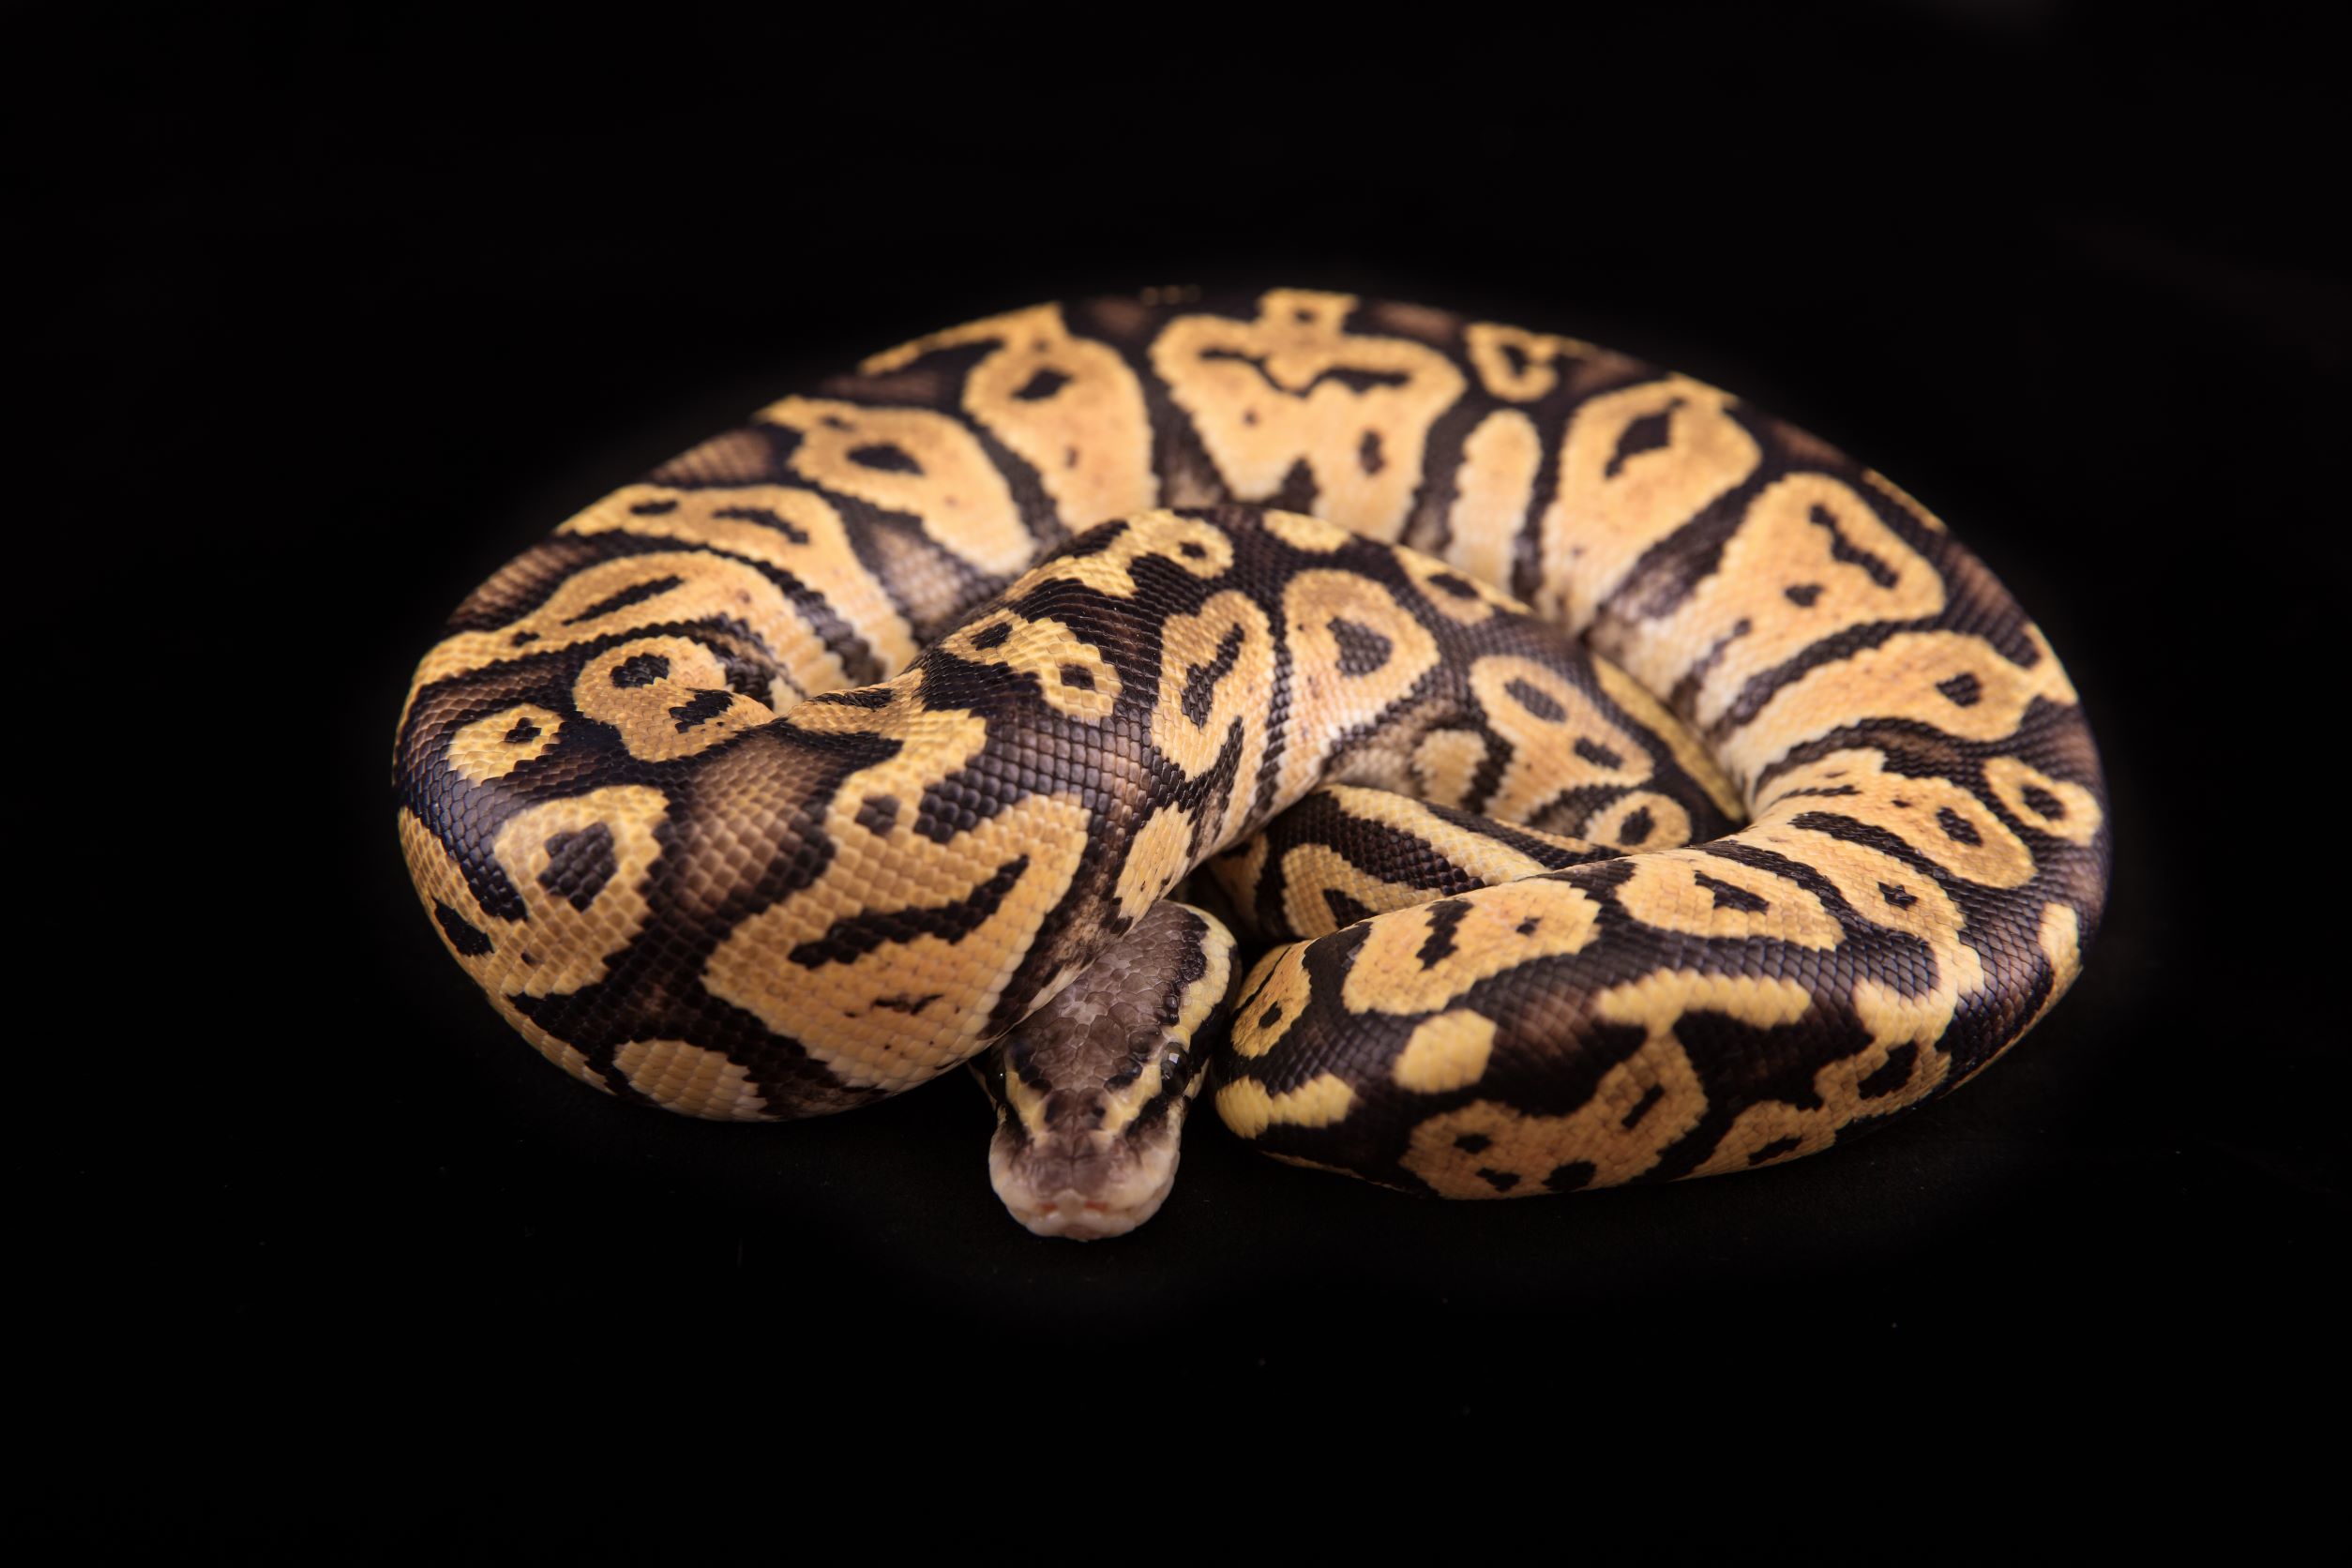 How often to clean your Ball Python's enclosure